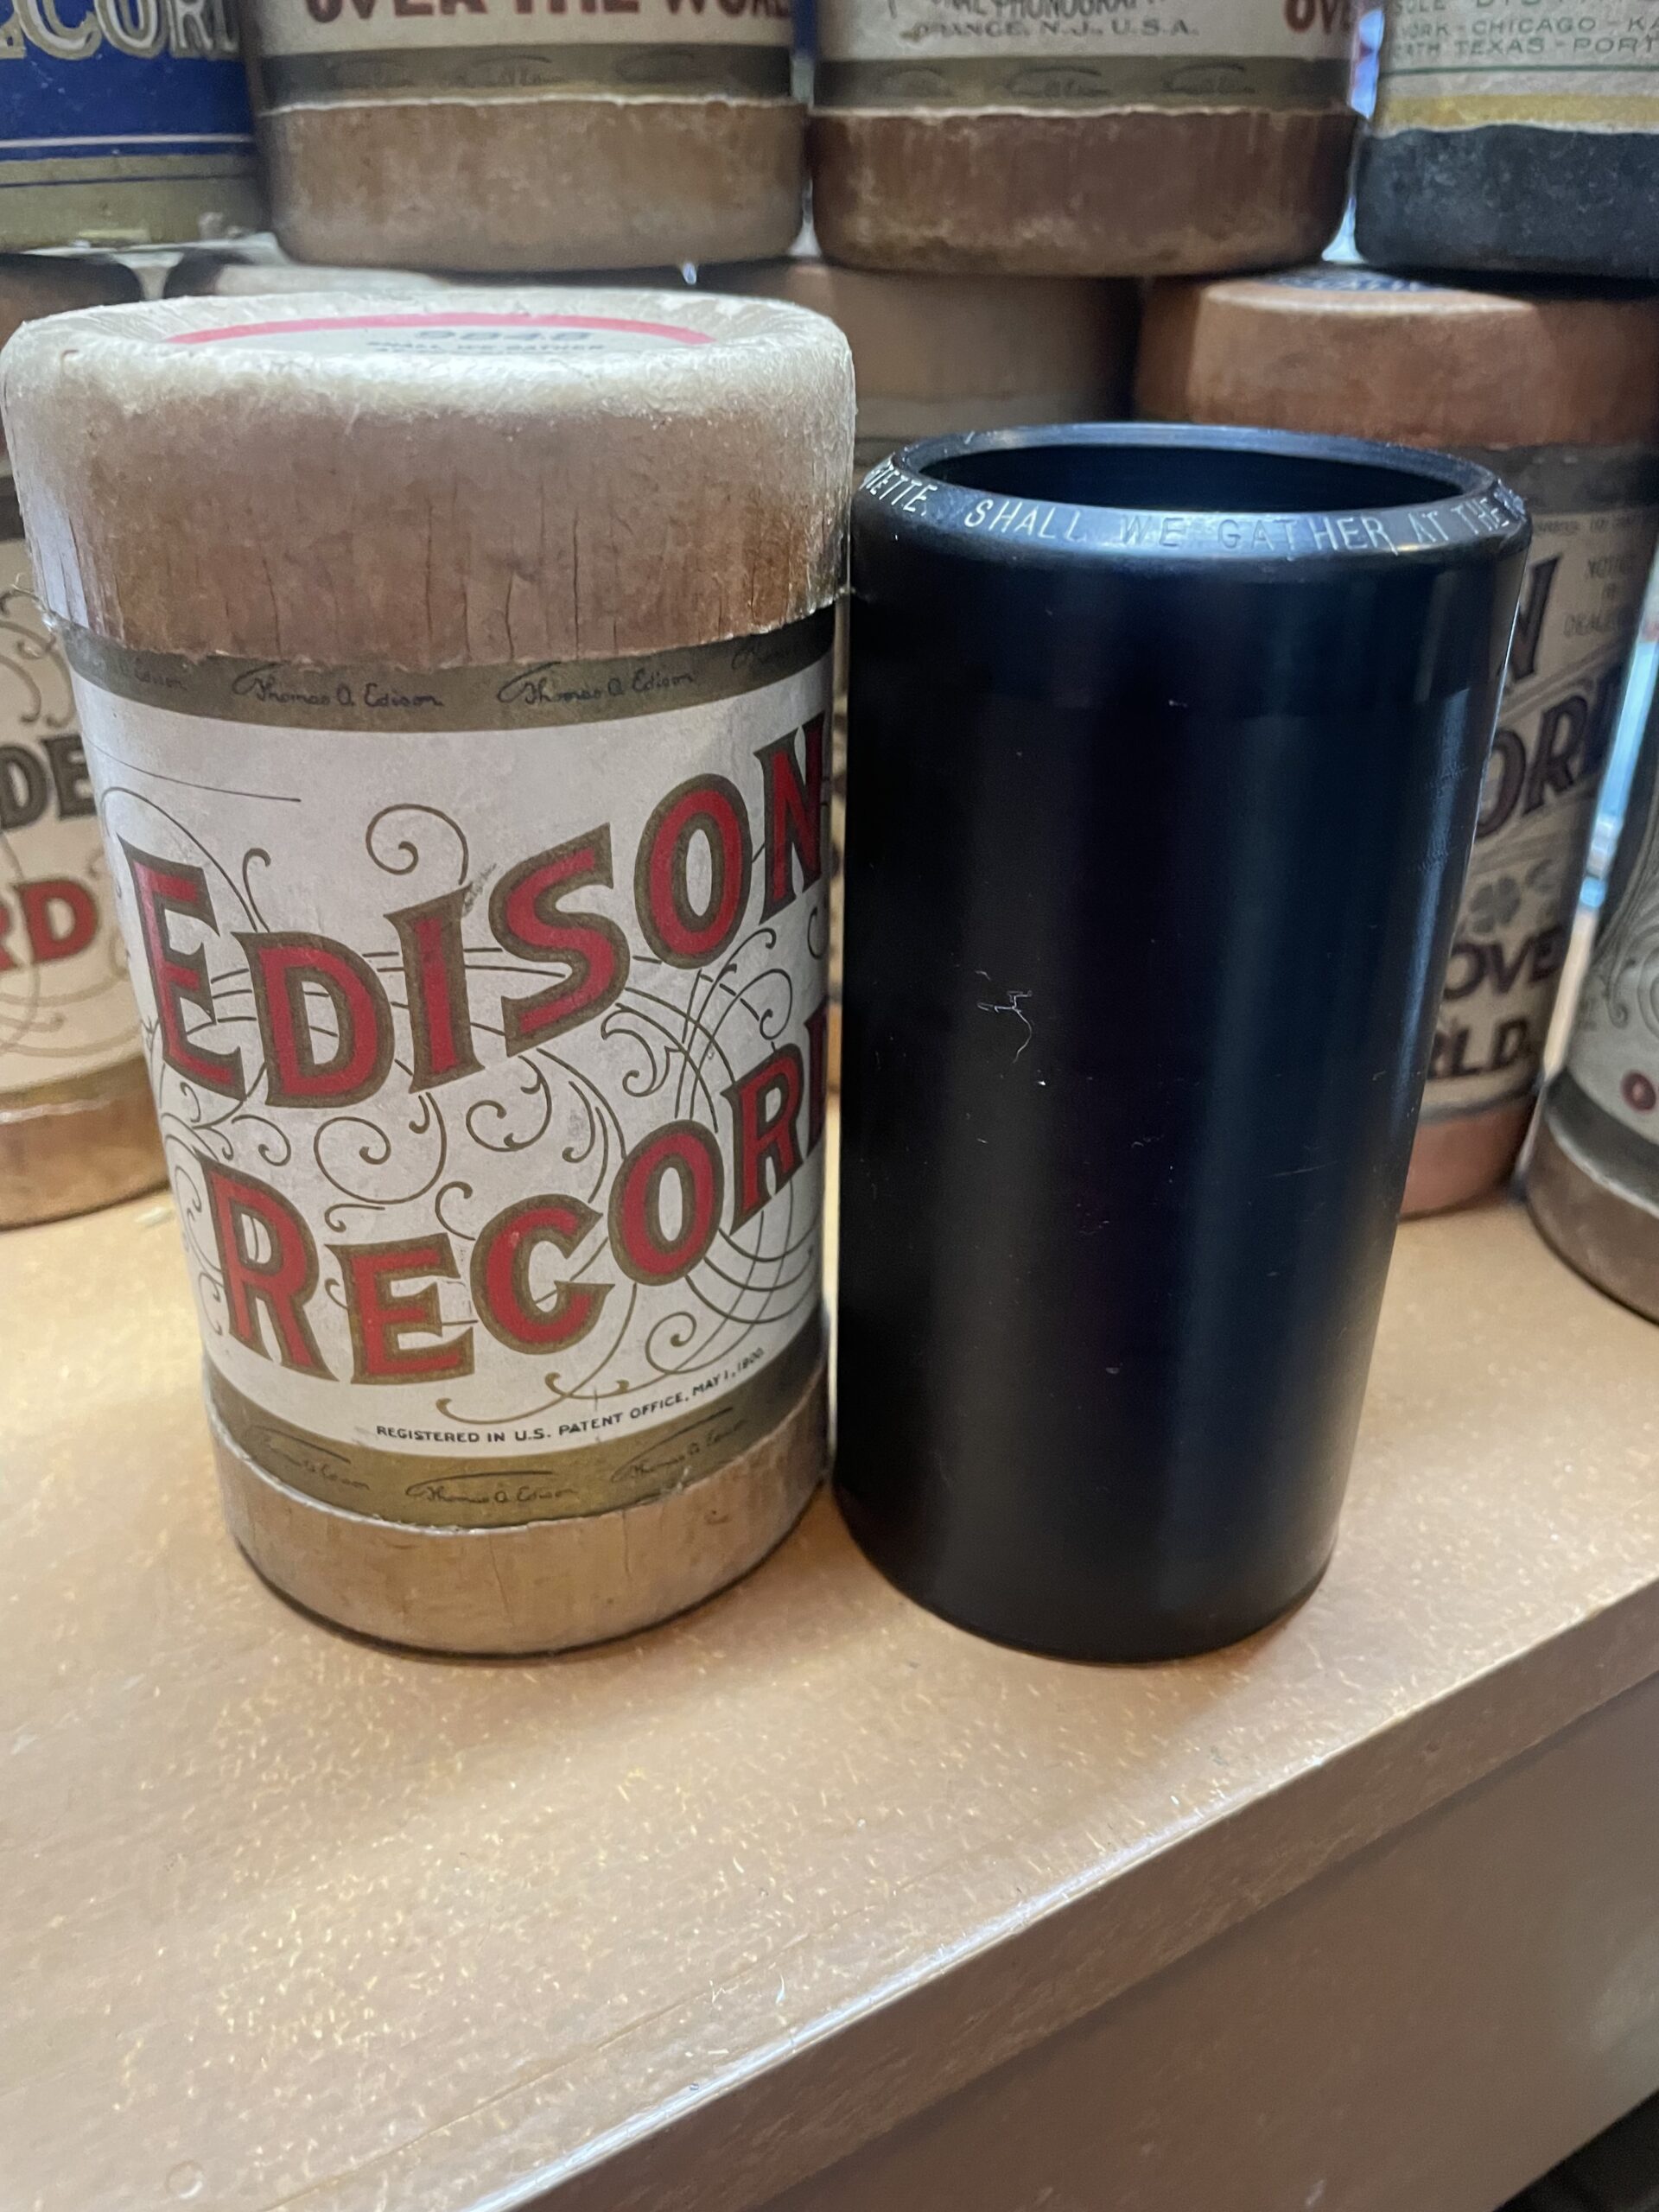 Edison 2 min. Cylinder… “Dancing with ma Baby”